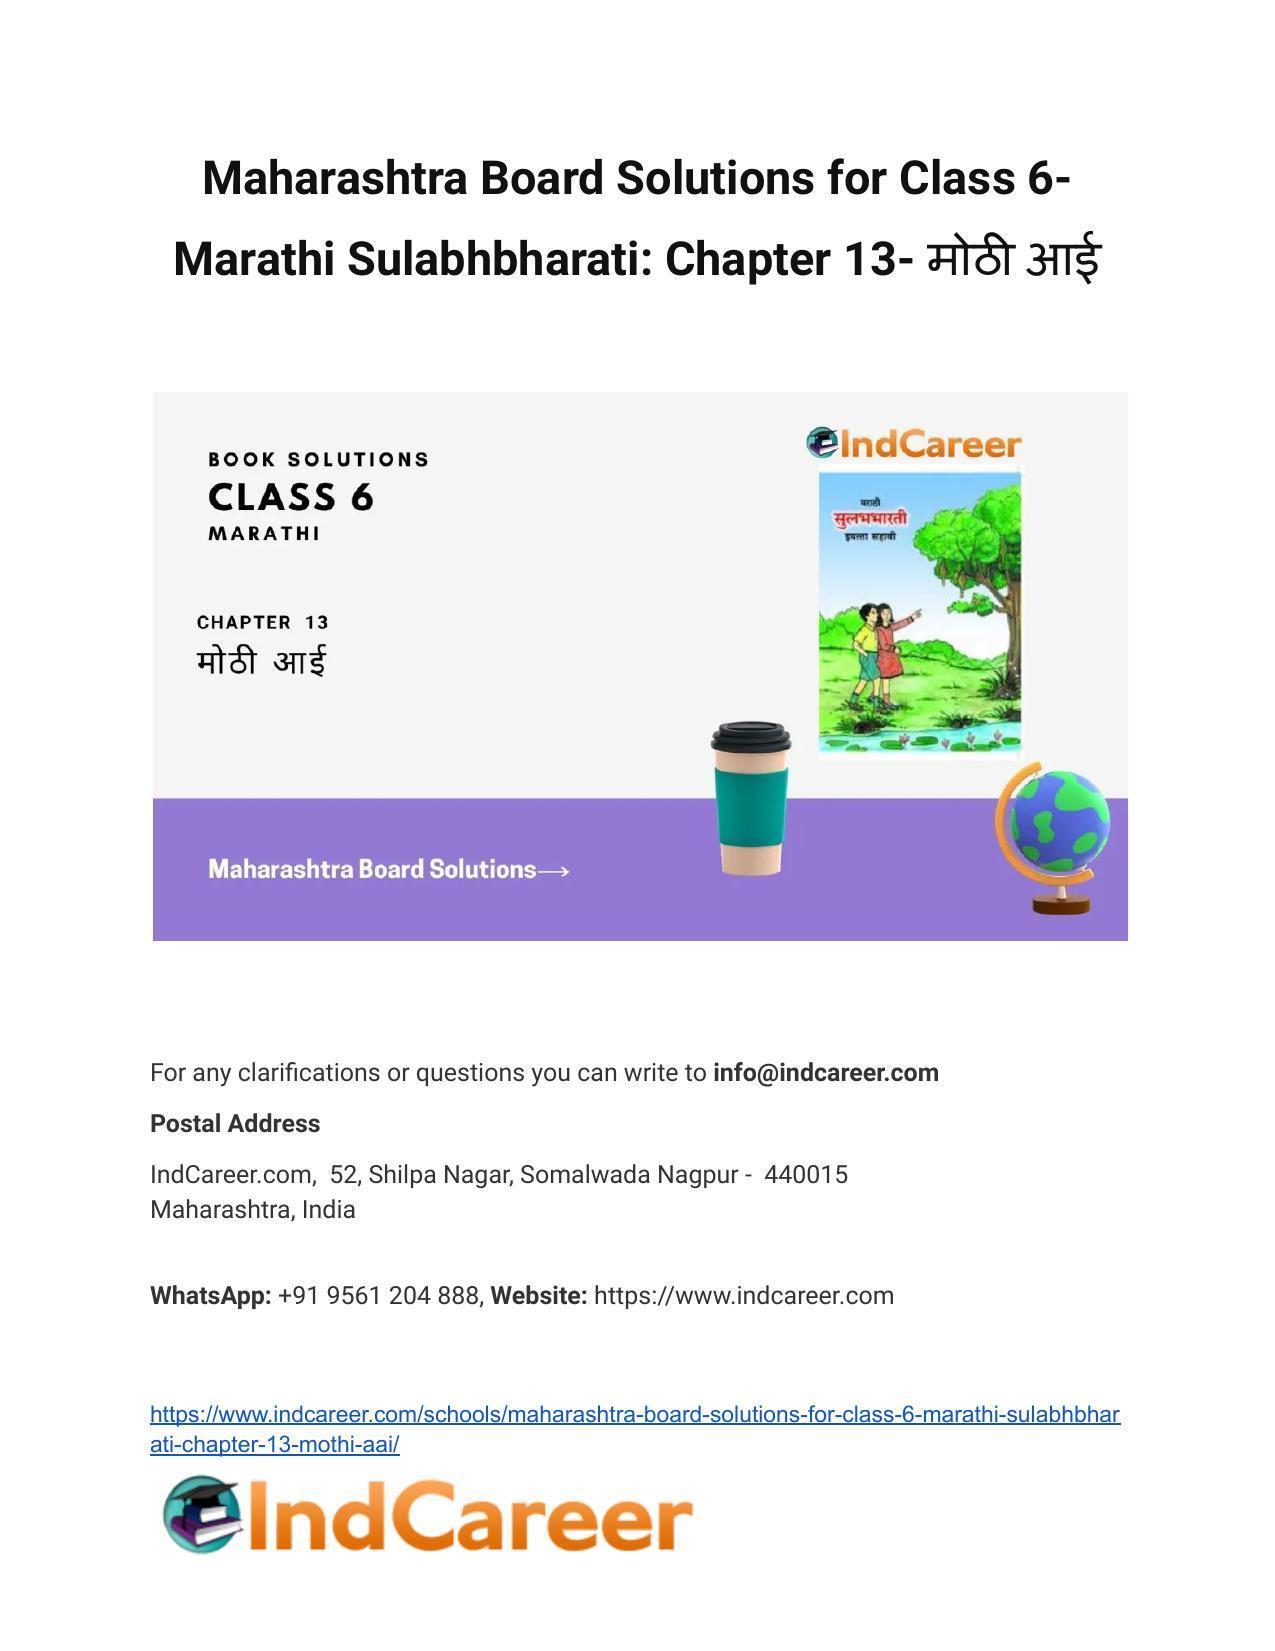 Maharashtra Board Solutions for Class 6- Marathi Sulabhbharati: Chapter 13- मोठी आई - Page 1